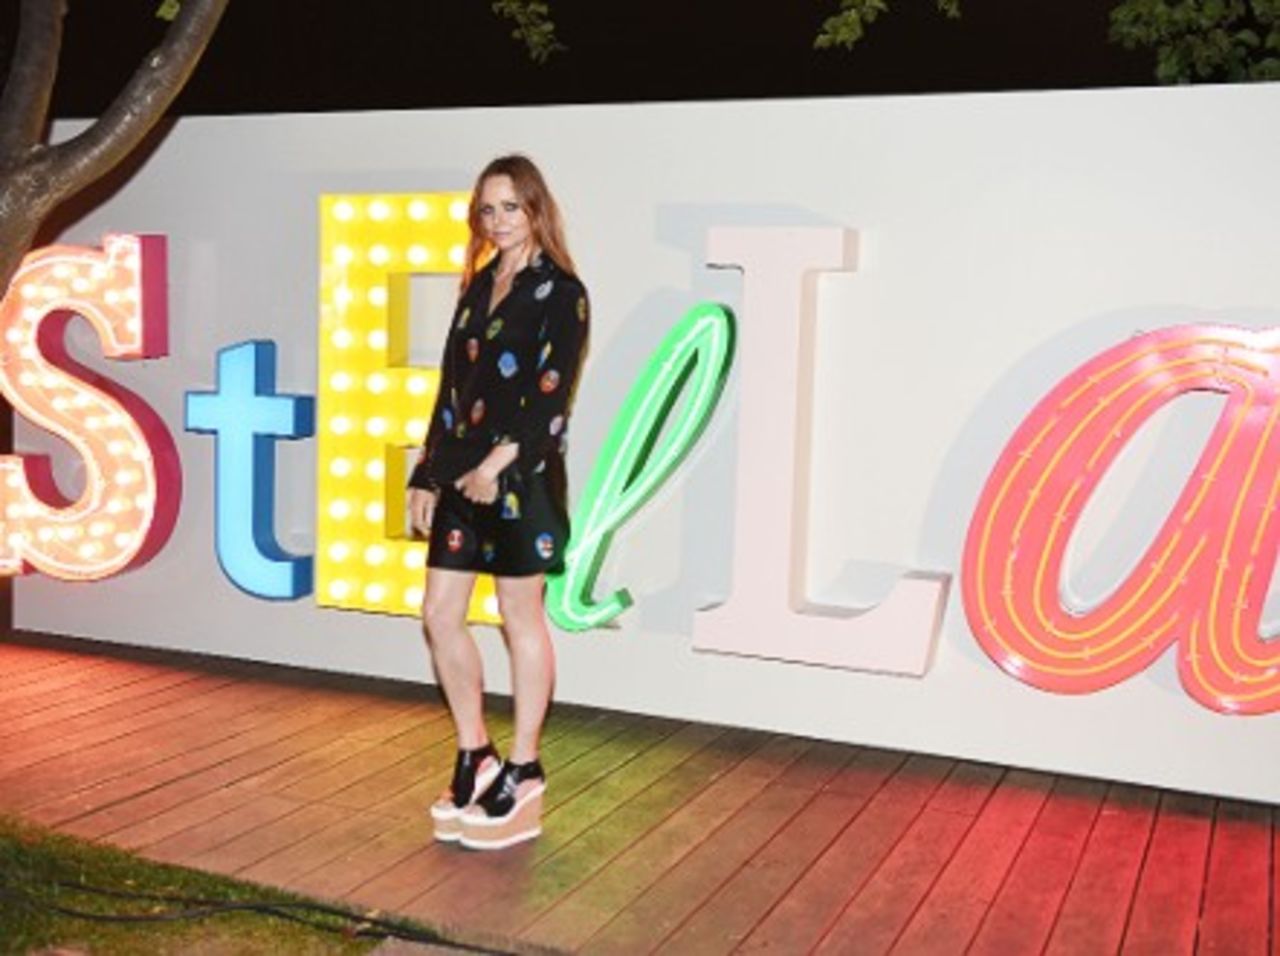 Stella McCartney poses in her Spring 2015 collection at the Stella McCartney Spring 2015 Presentation and Party at Roppongi Hills in Tokyo in 2014.